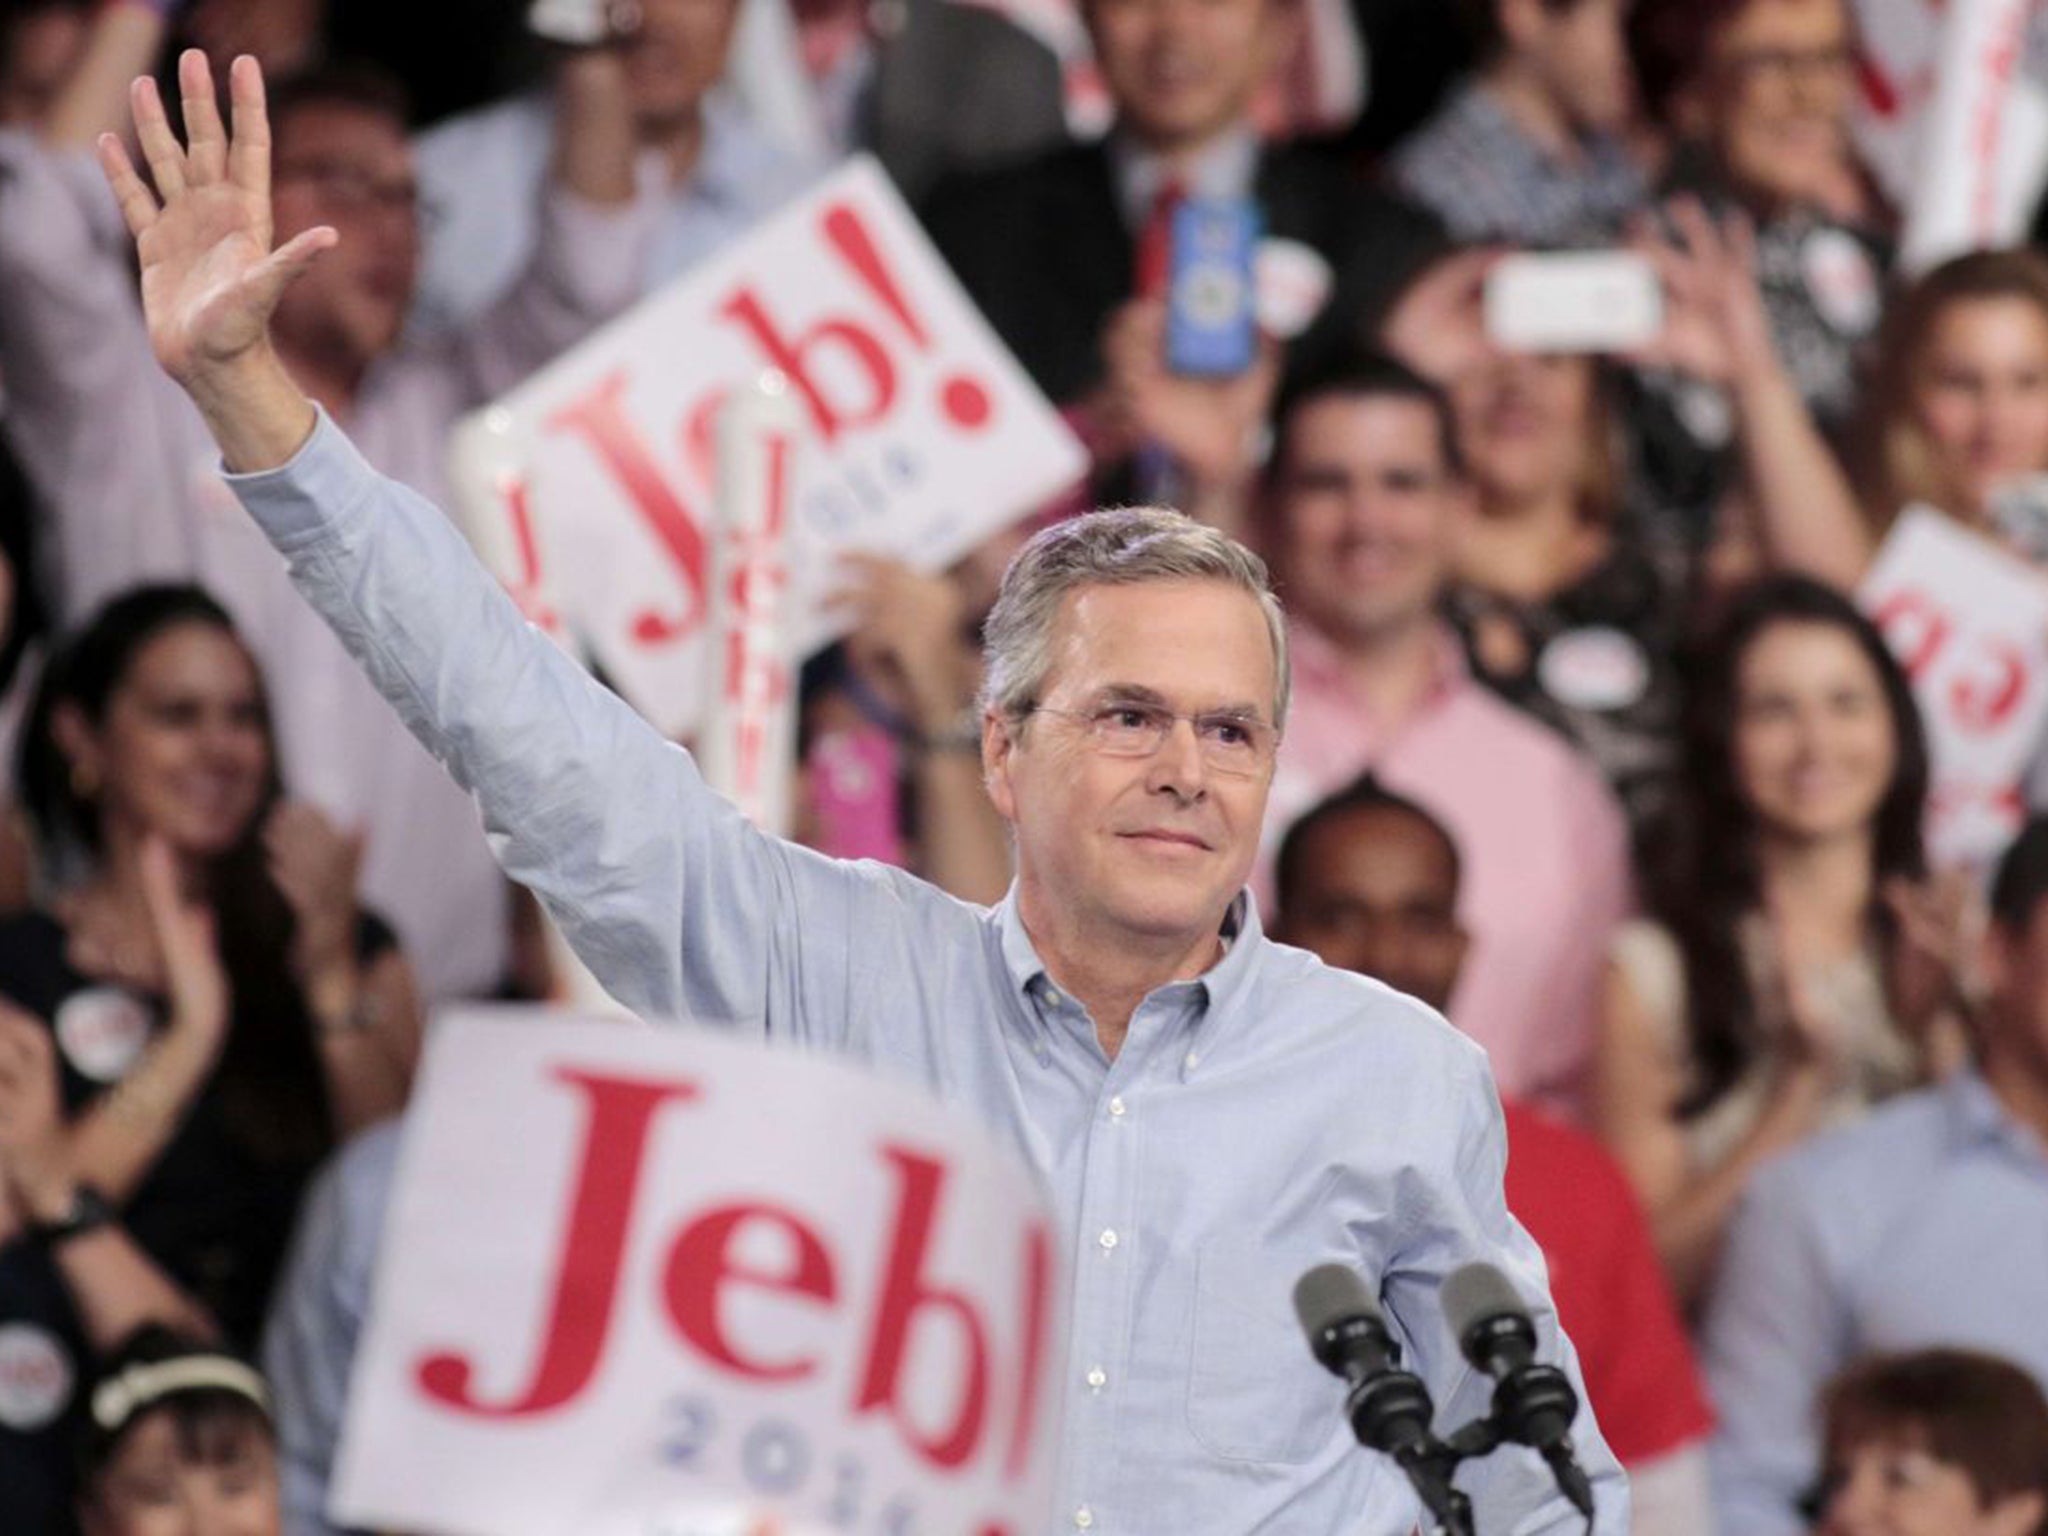 Former Florida Governor Jeb Bush formally announced his campaign for the 2016 Republican presidential nomination during a kickoff rally at Dade College in Miami